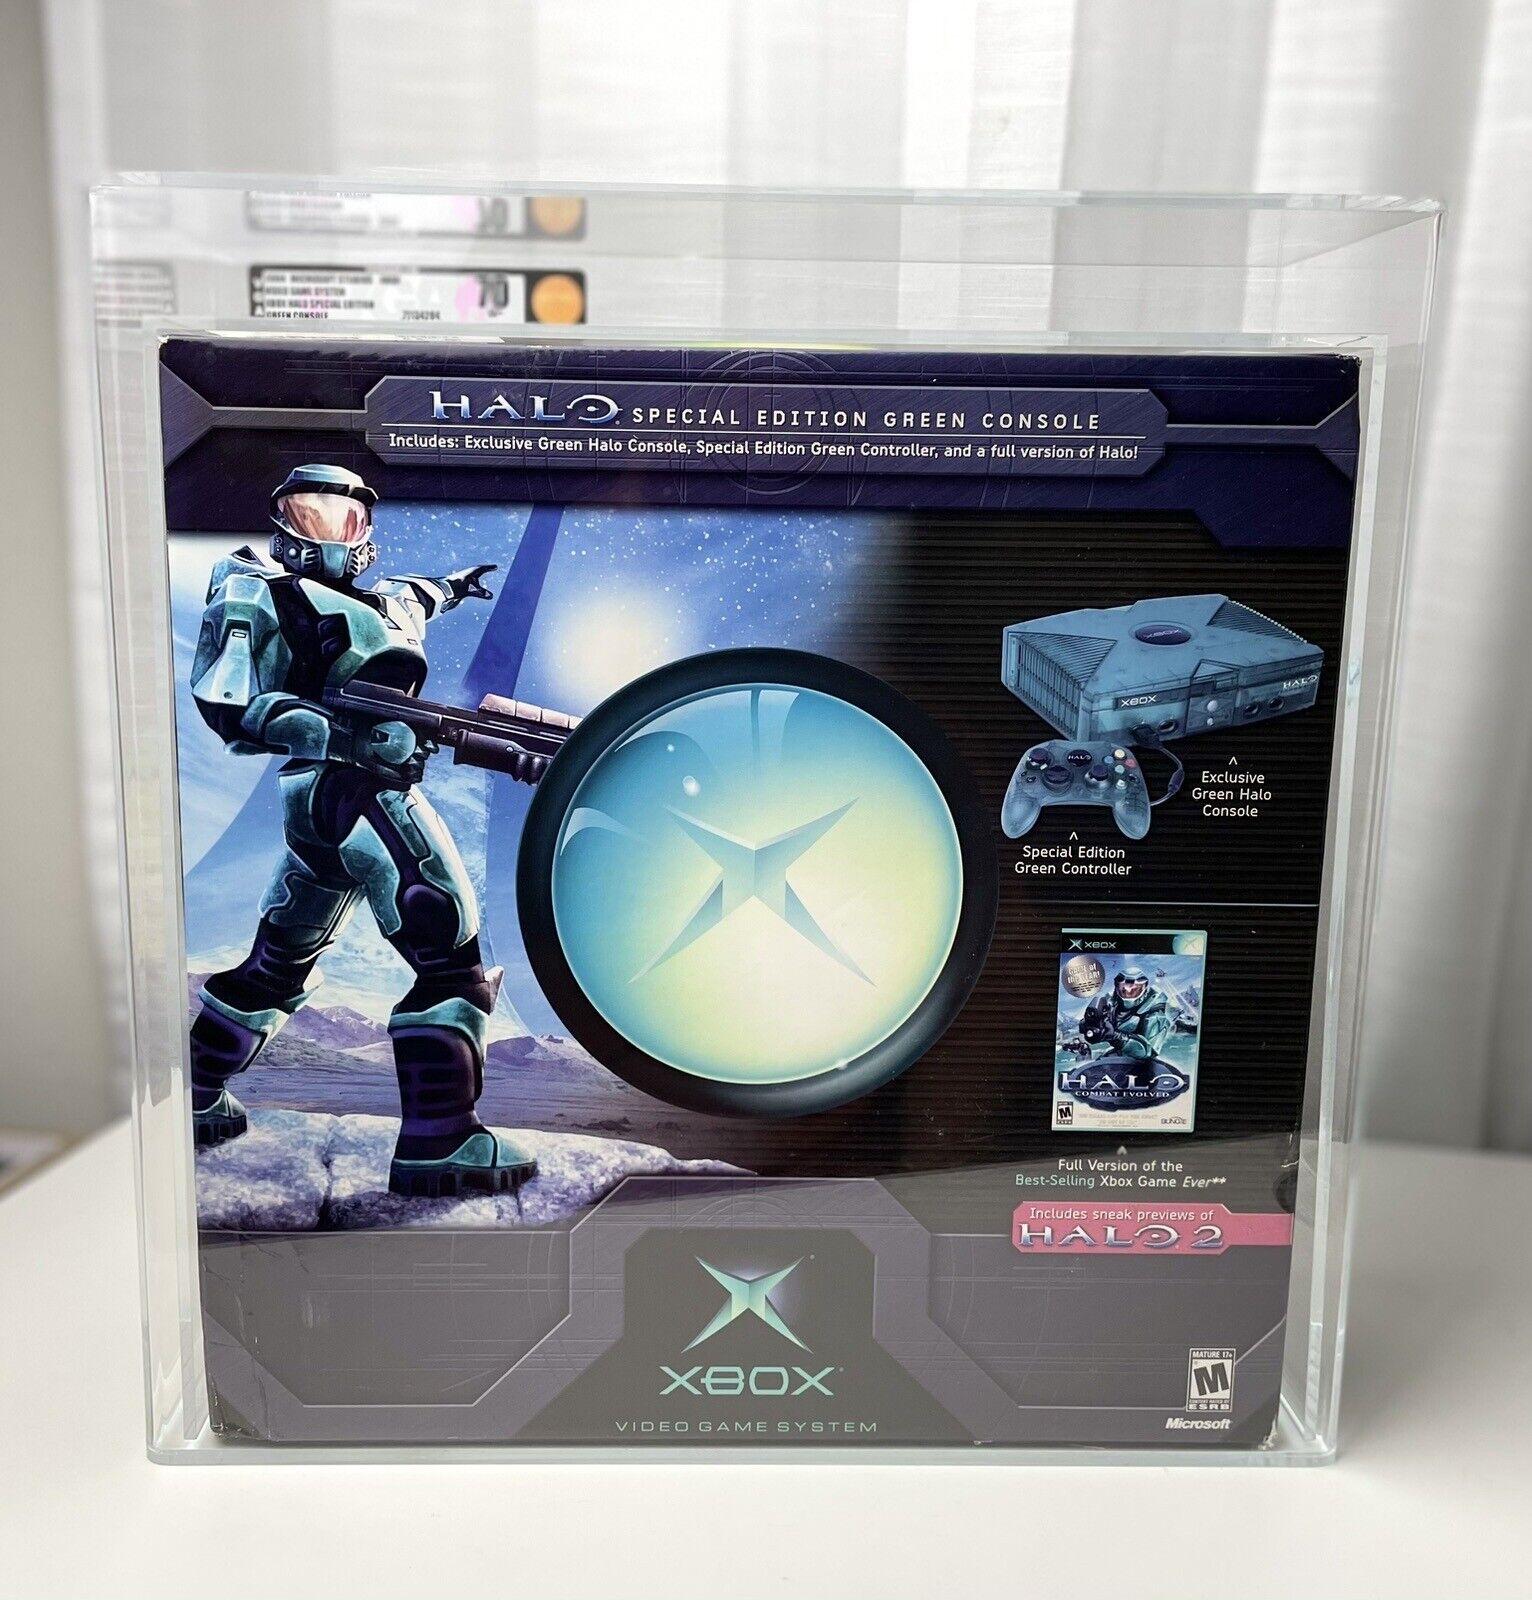 New Factory Sealed & Graded Original Xbox Halo Special Edition Green Console